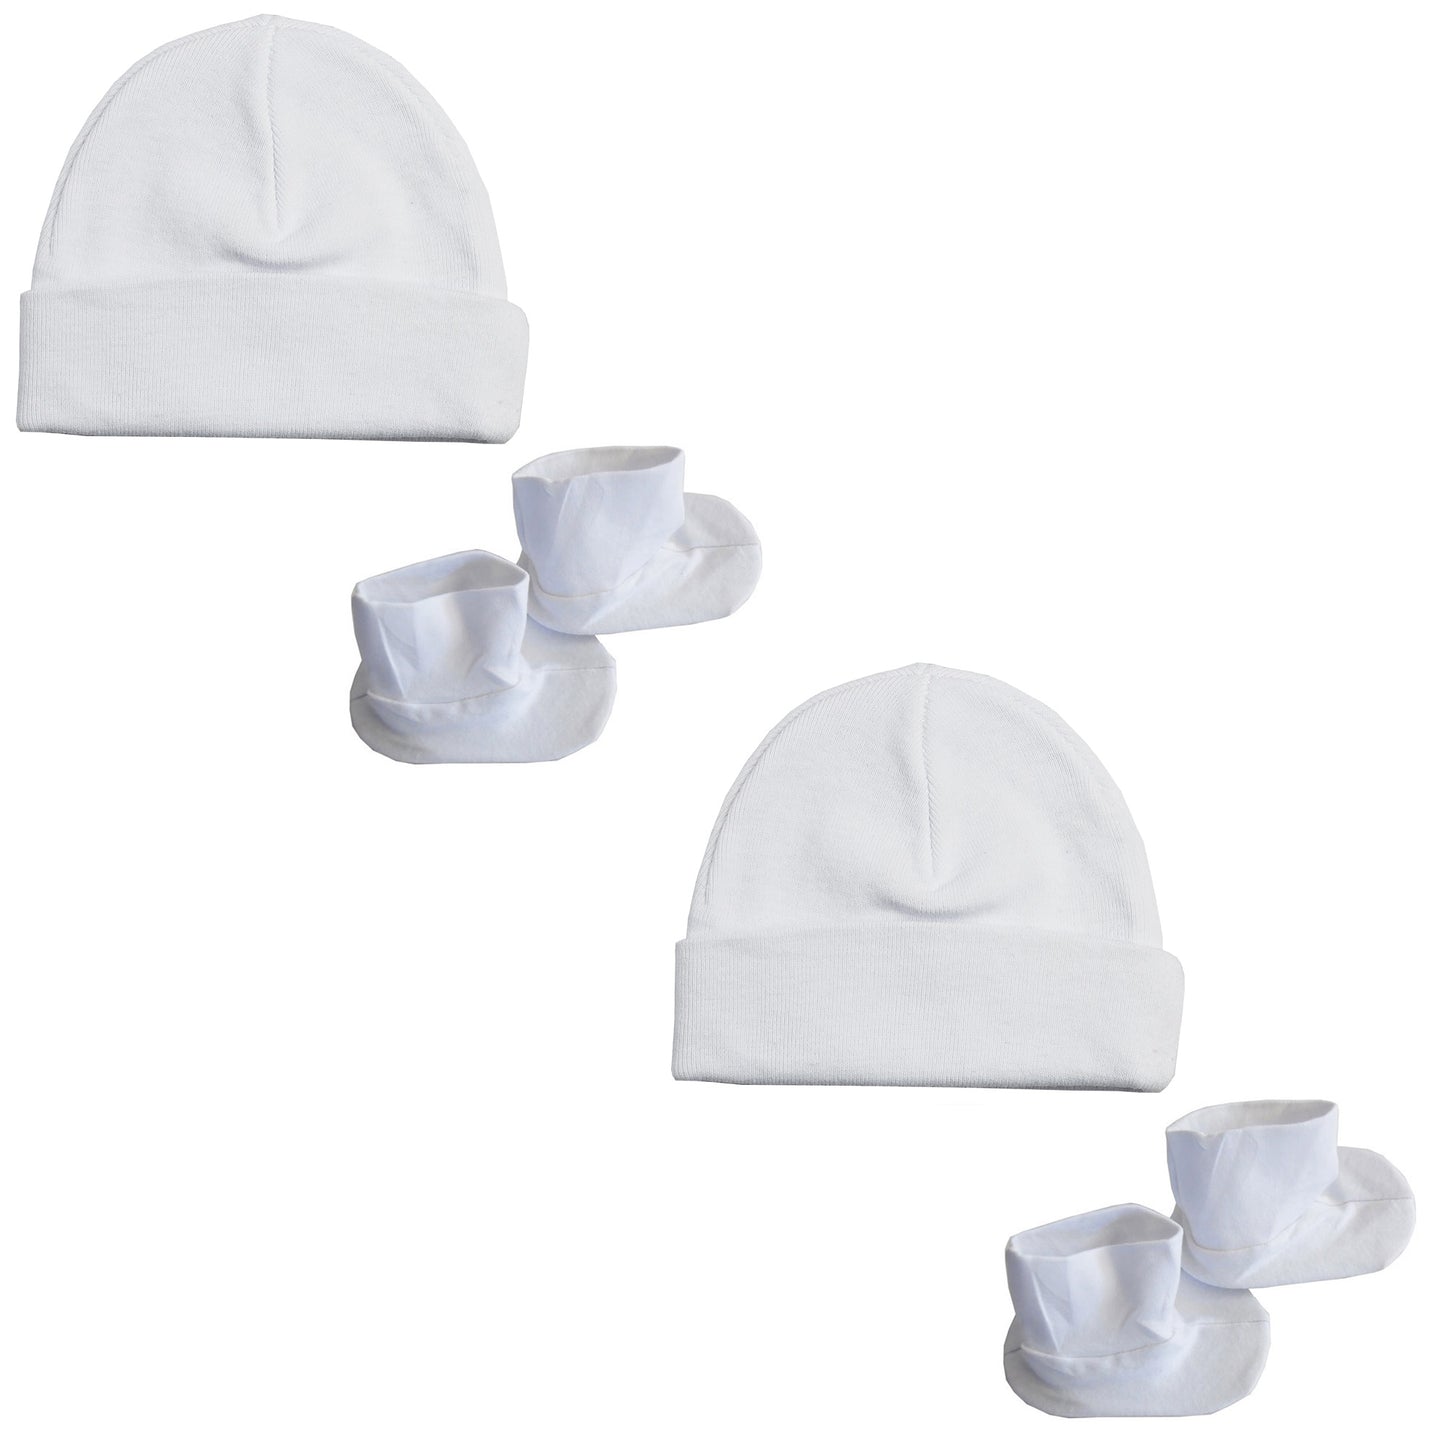 Cap & Bootie Set - White (Pack of 2) 029.2.Packs